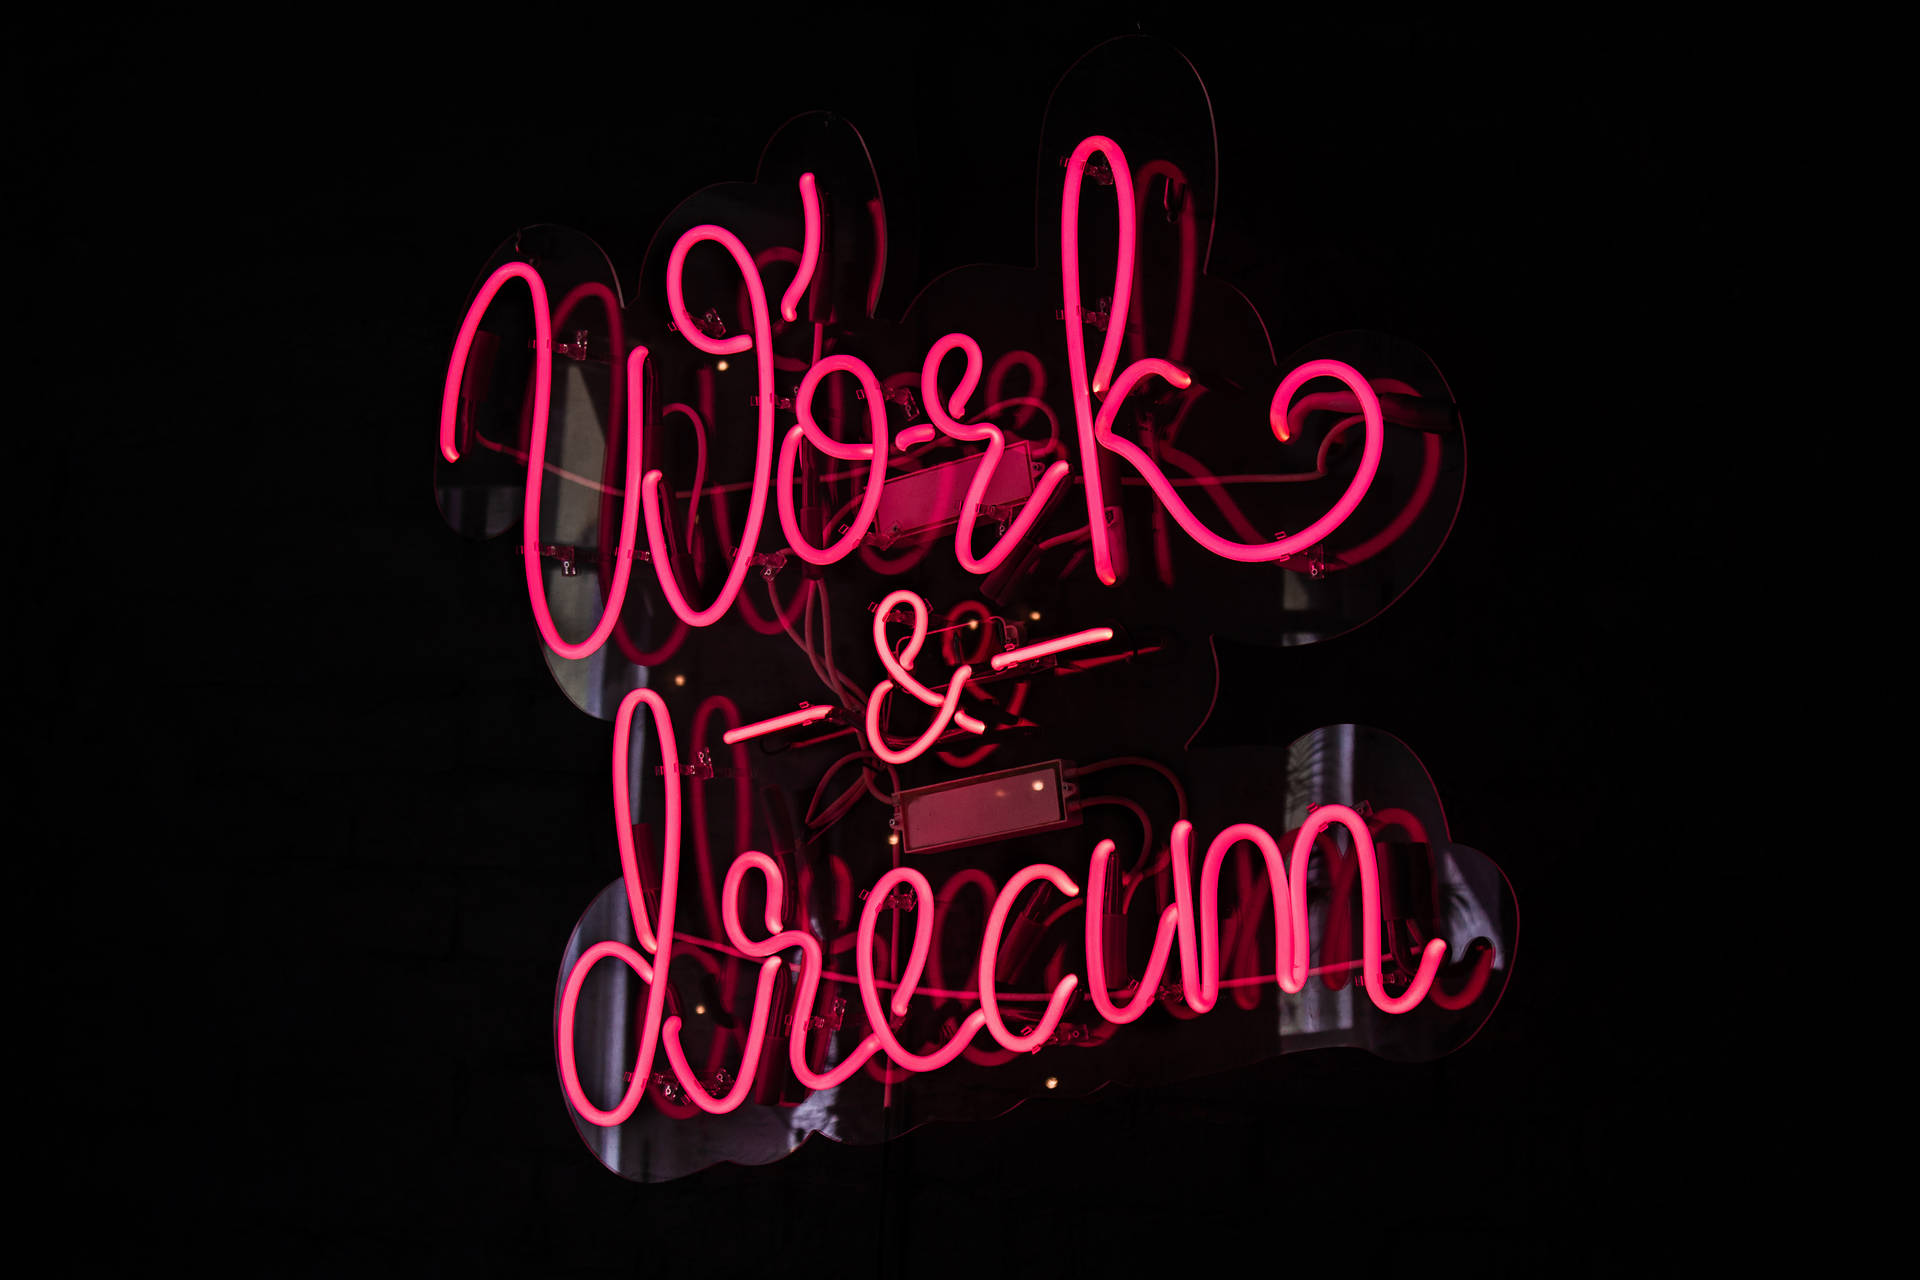 Cool Neon Work And Dream Lights Background